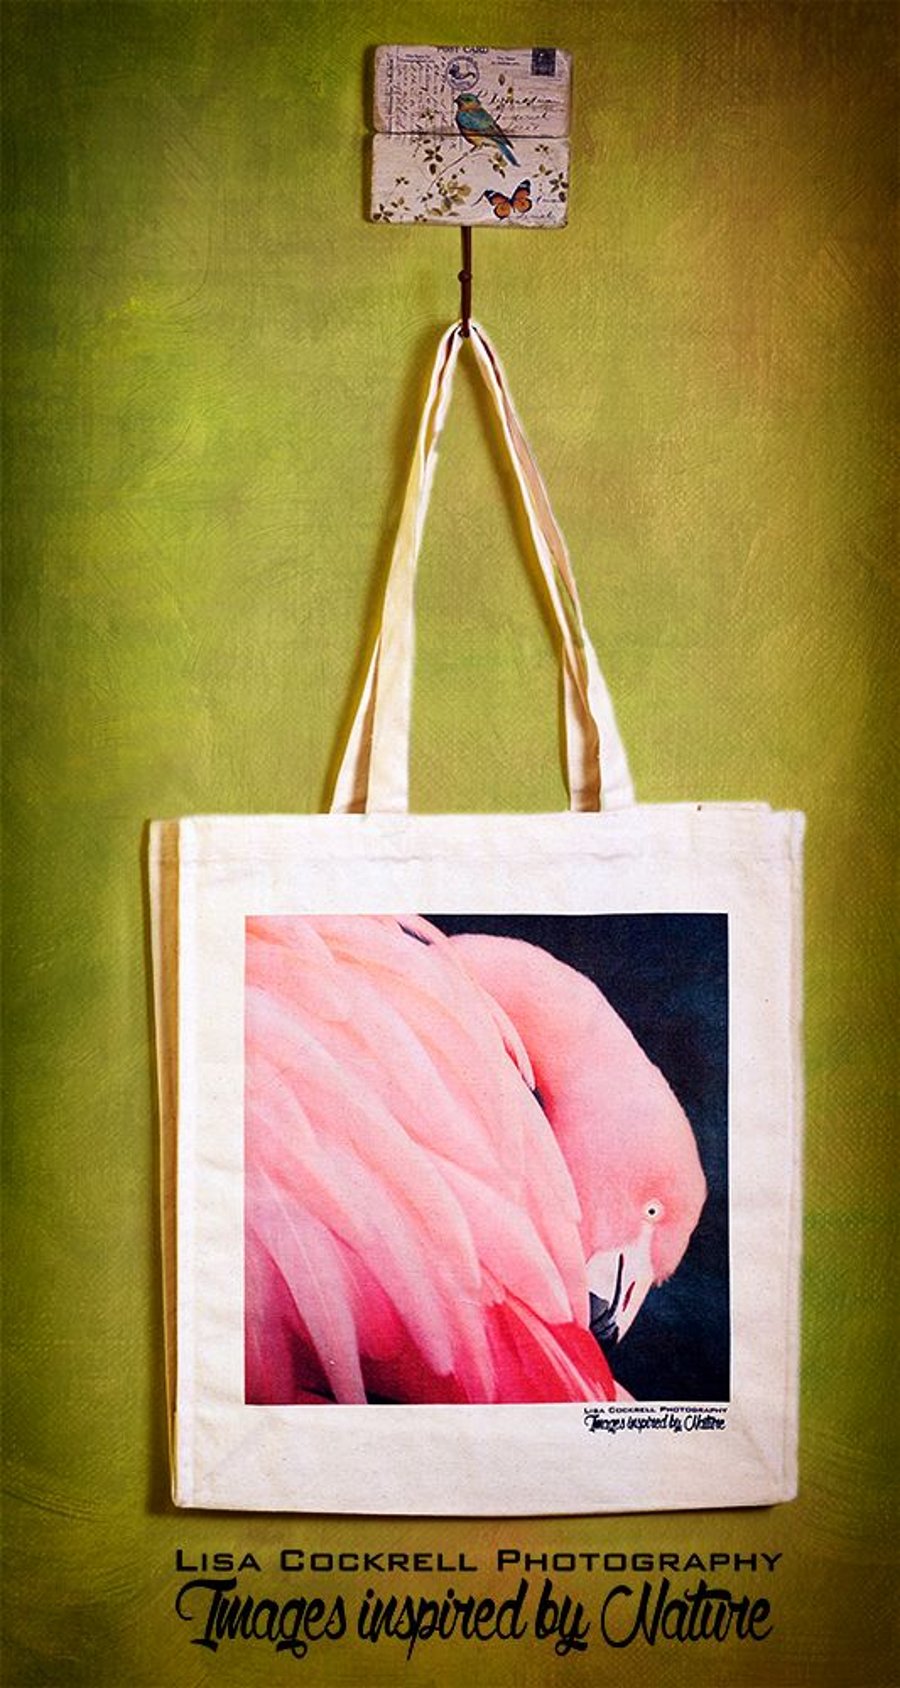 FLAMINGO - TOTE BAGS INSPIRED BY NATURE FROM LISA COCKRELL PHOTOGRAPHY